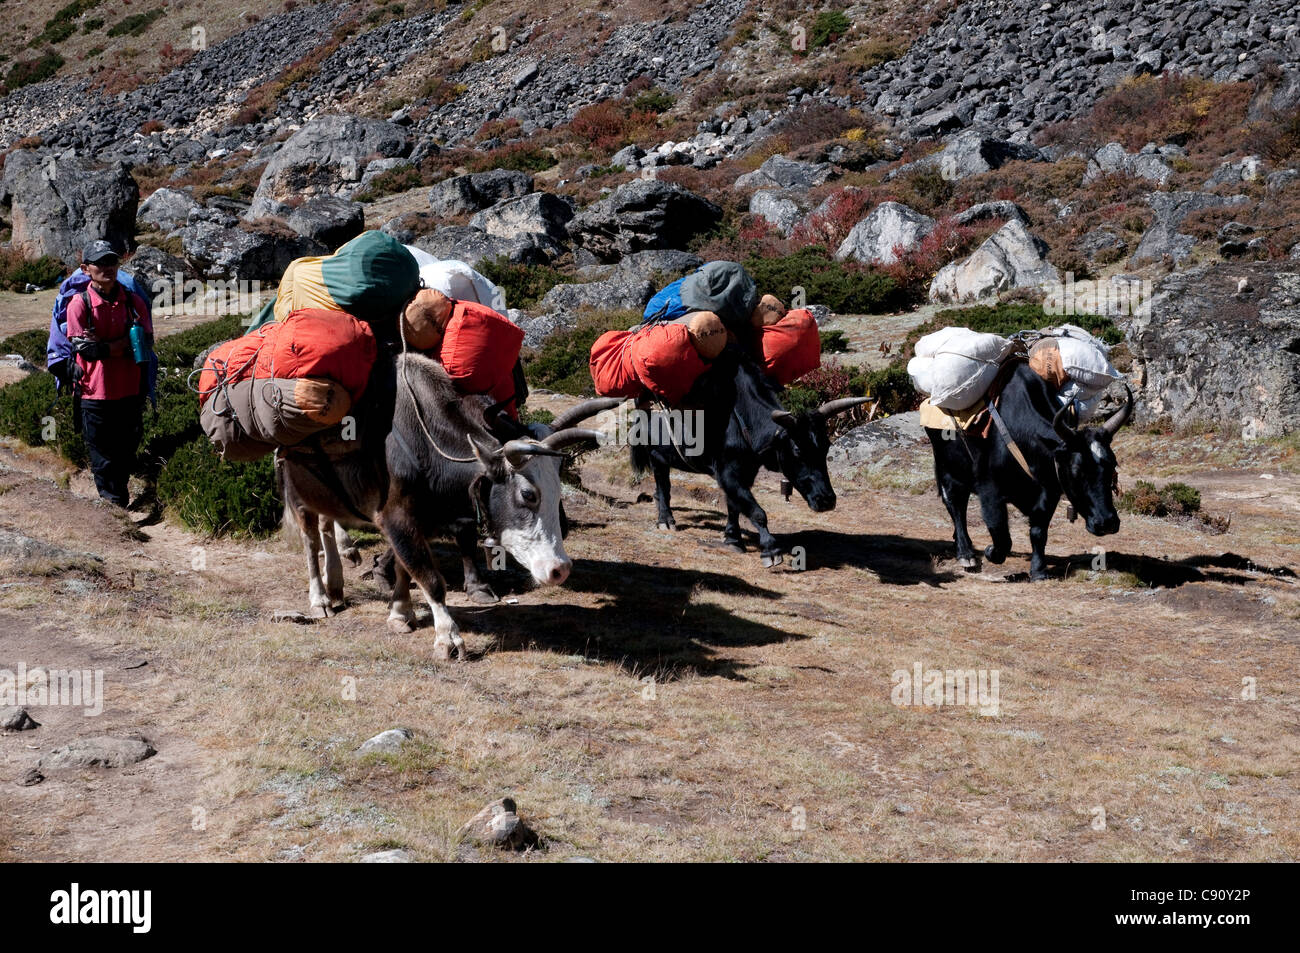 The yak is a sturdy pack animal used on the routes through the foothills of the mountains of Nepal to carry the equipment and Stock Photo